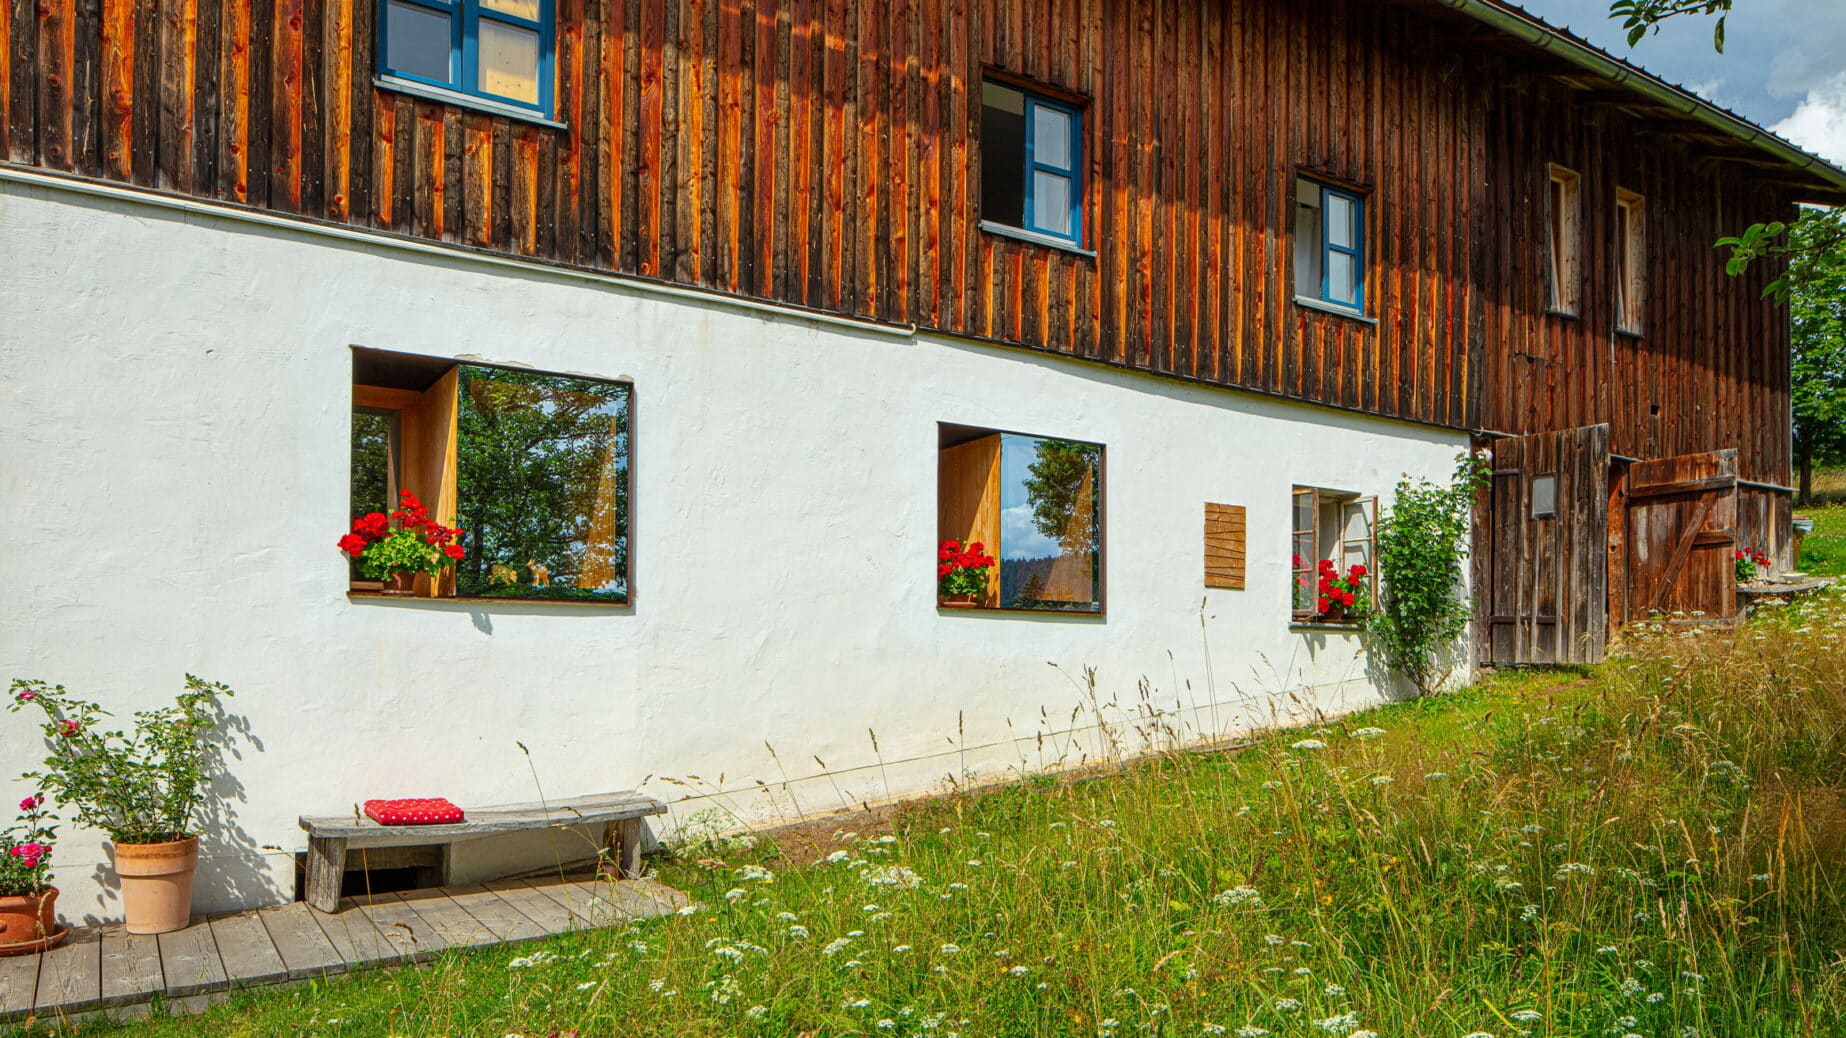 Besides Outside: B&B Haidl-Madl in the Bavarian Forest